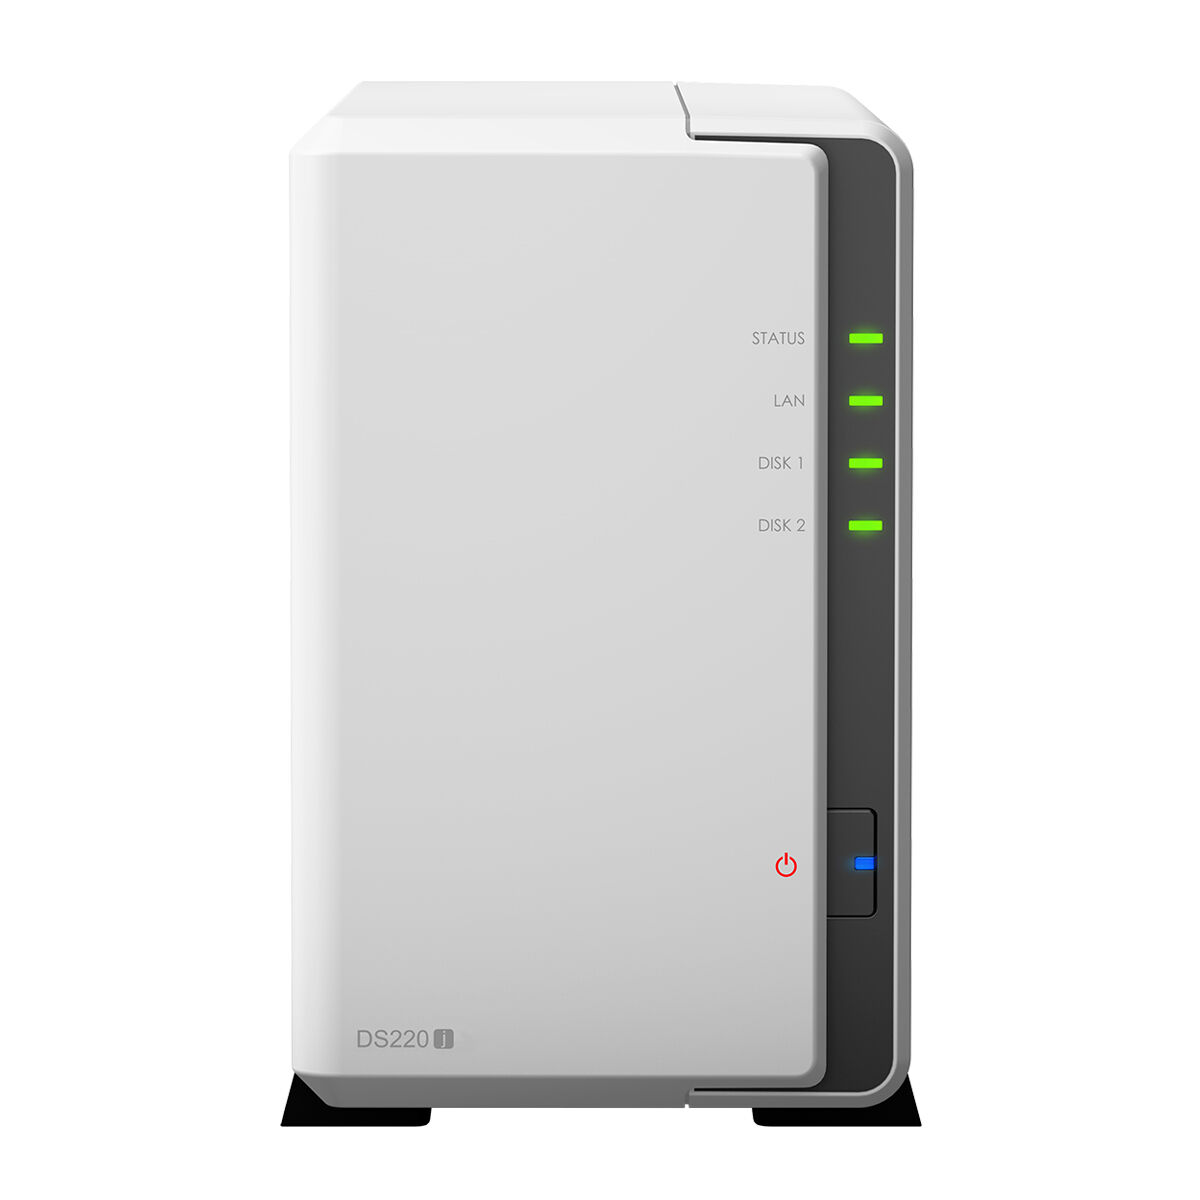 Synology_DS220j_Front_2cdb